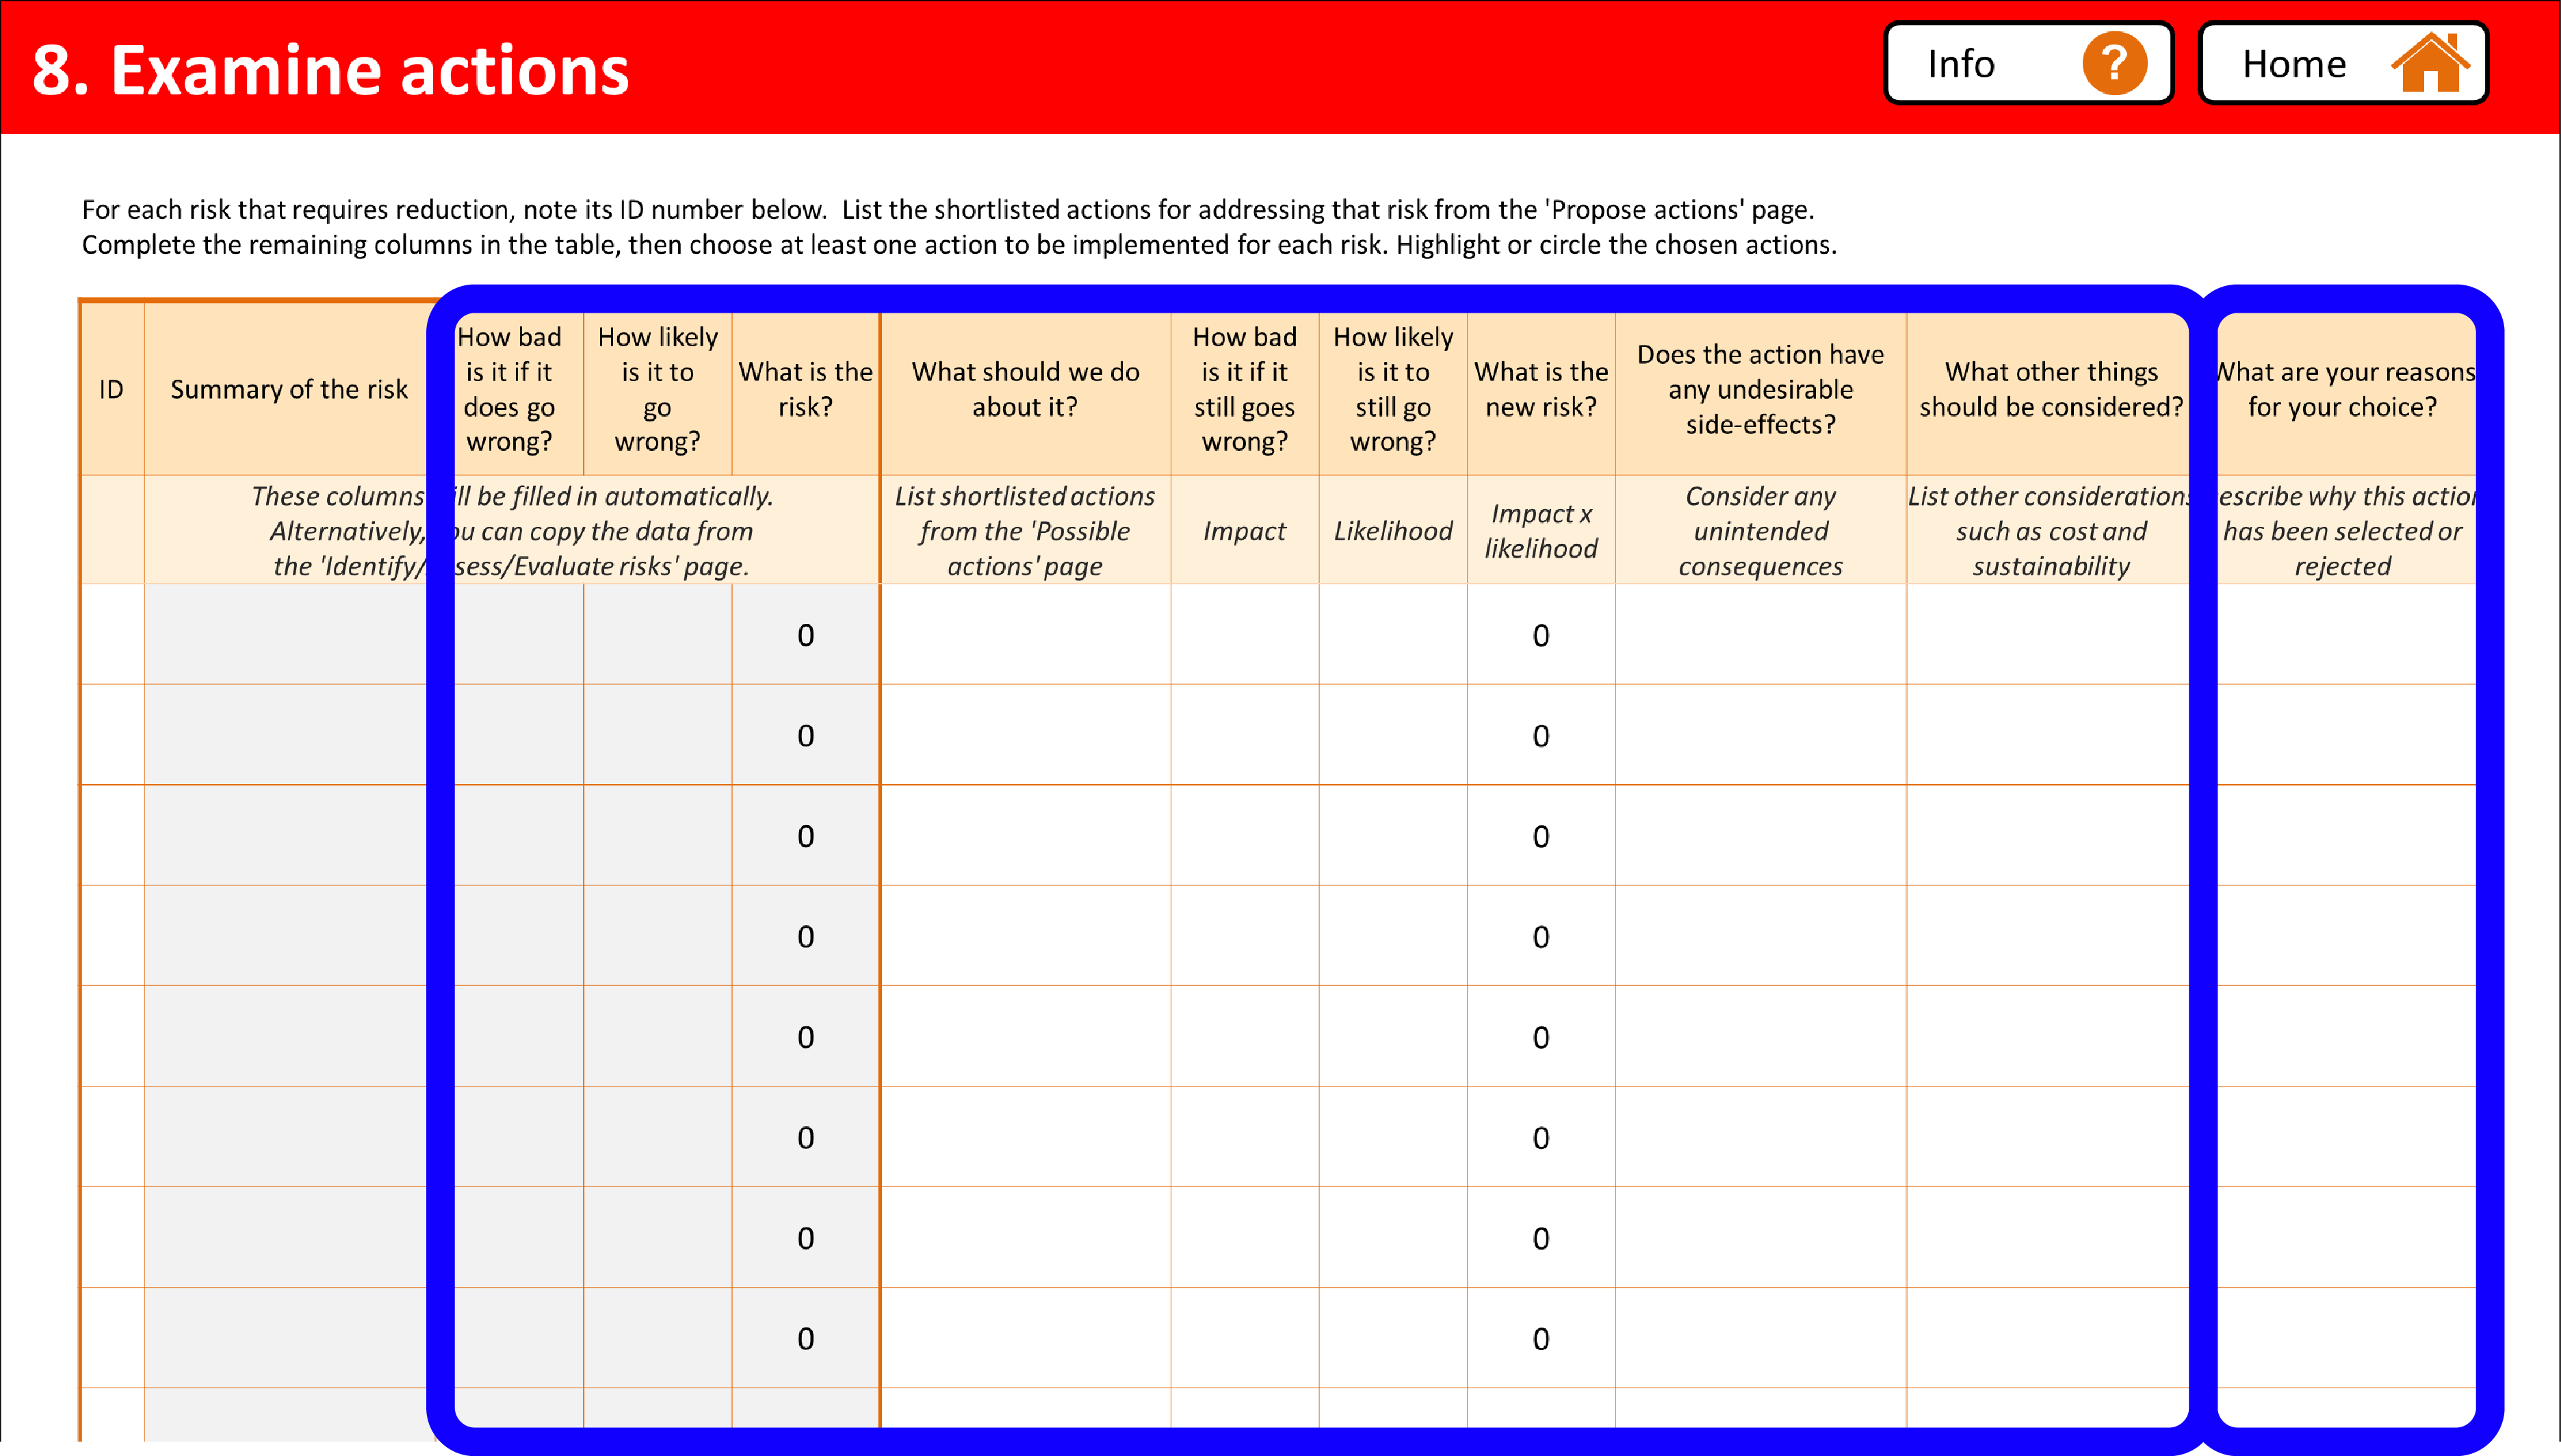 Screenshot of Examine actions page of the assessment form